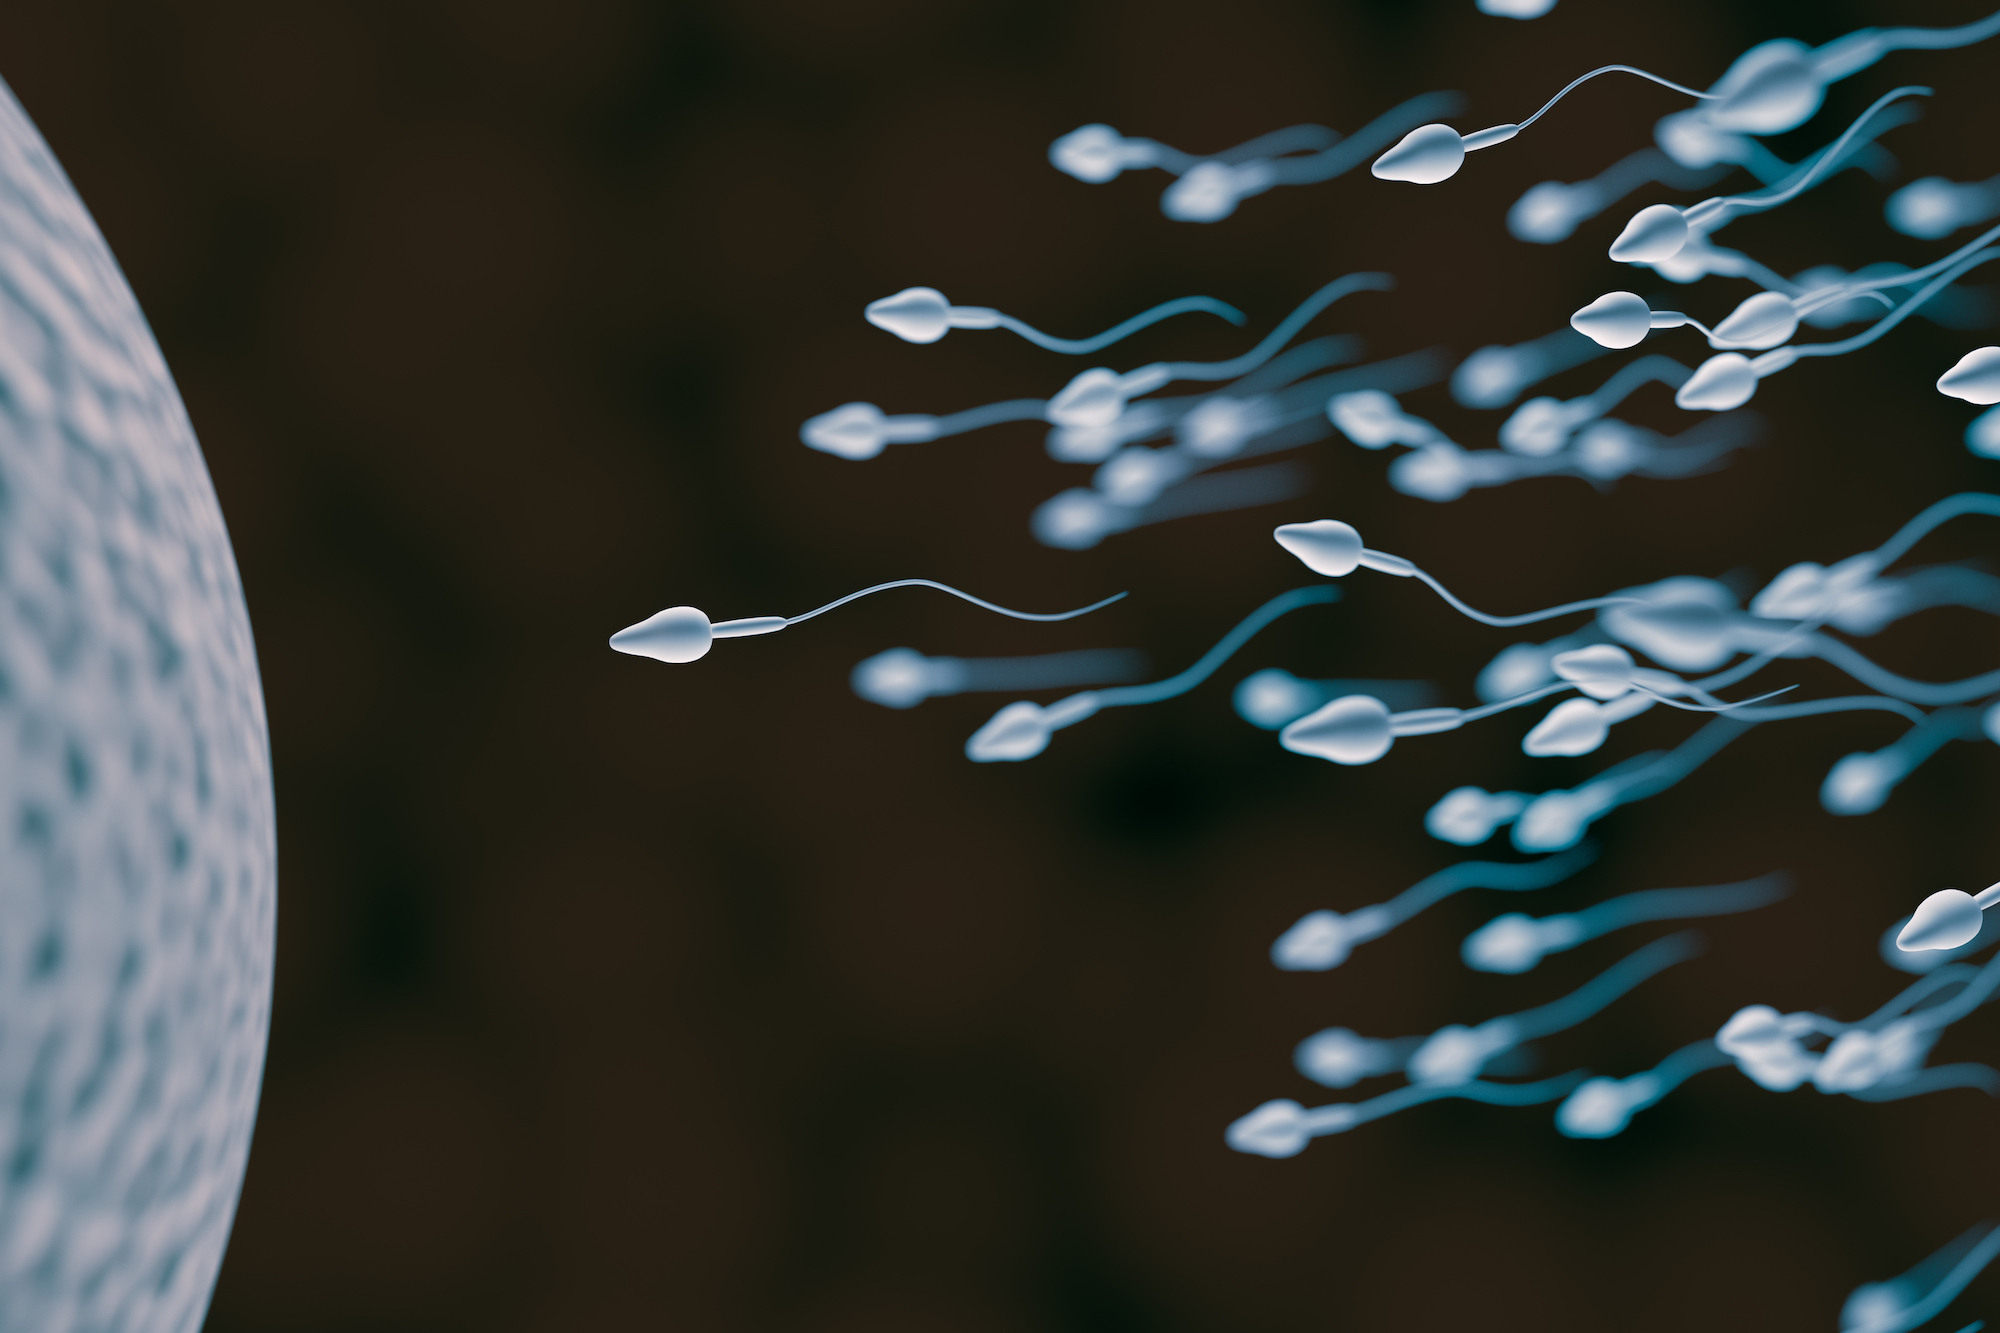 An illustration of sperm cells and an egg